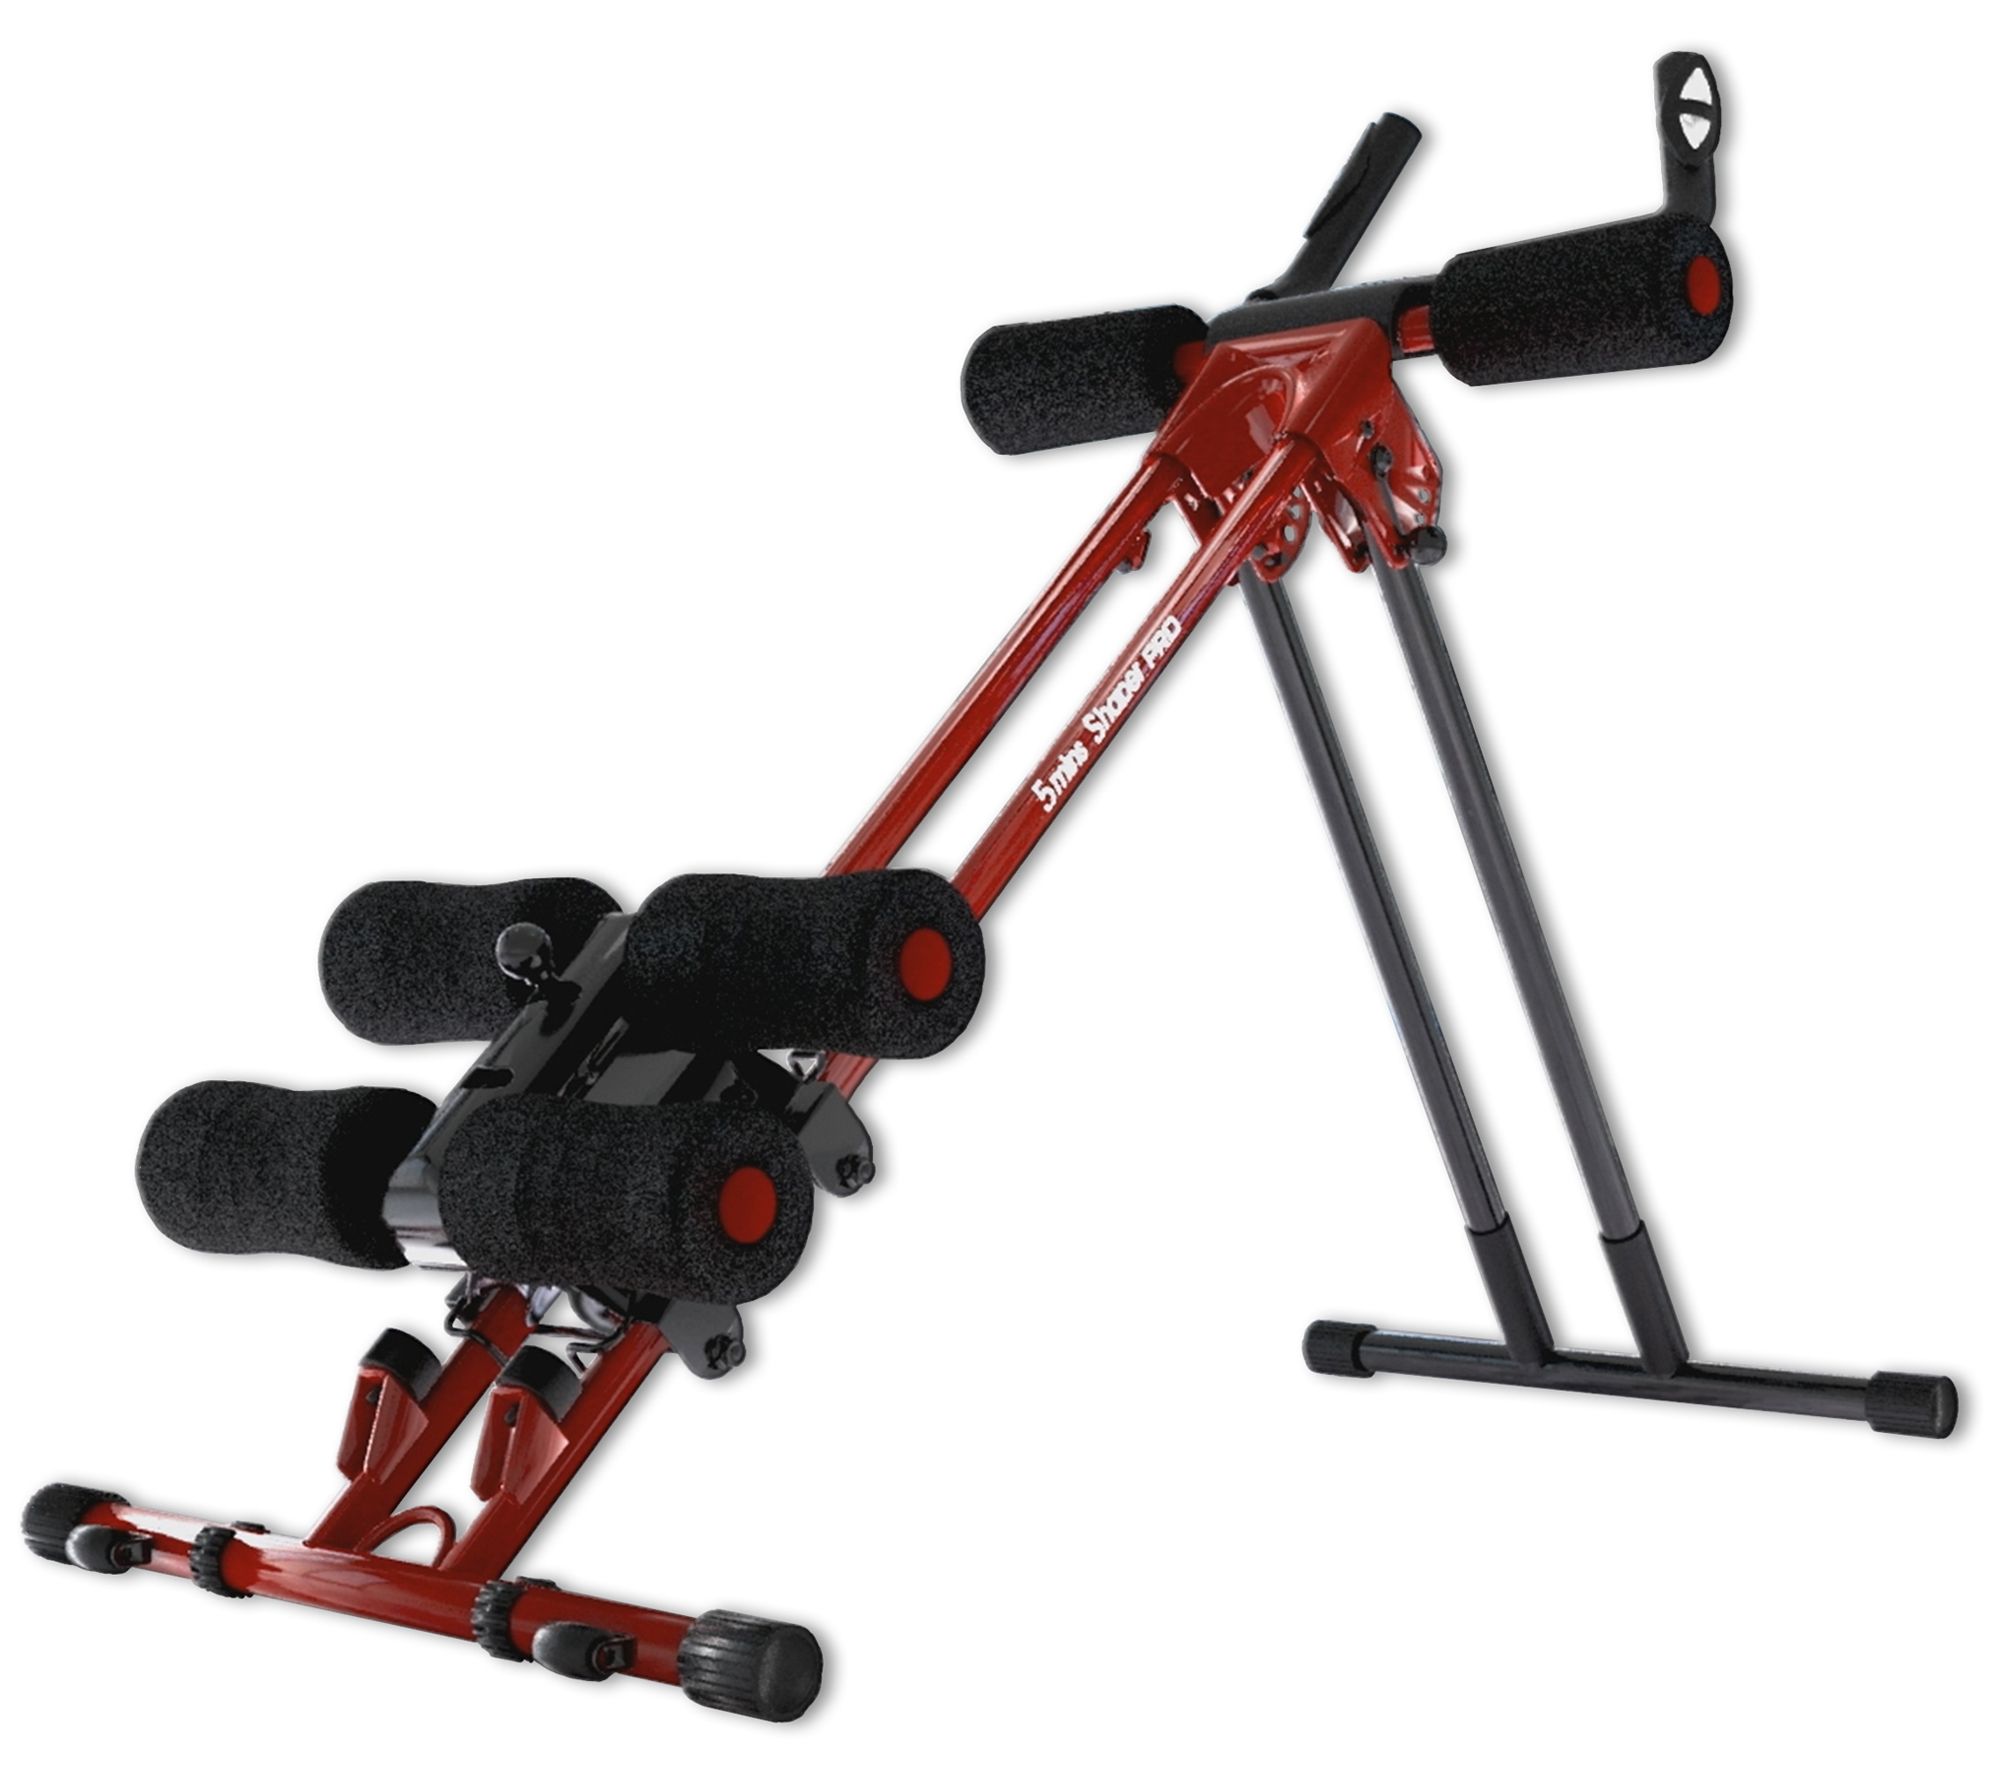 Easy, shaper, pro full body exercise, workout machine for Sale in